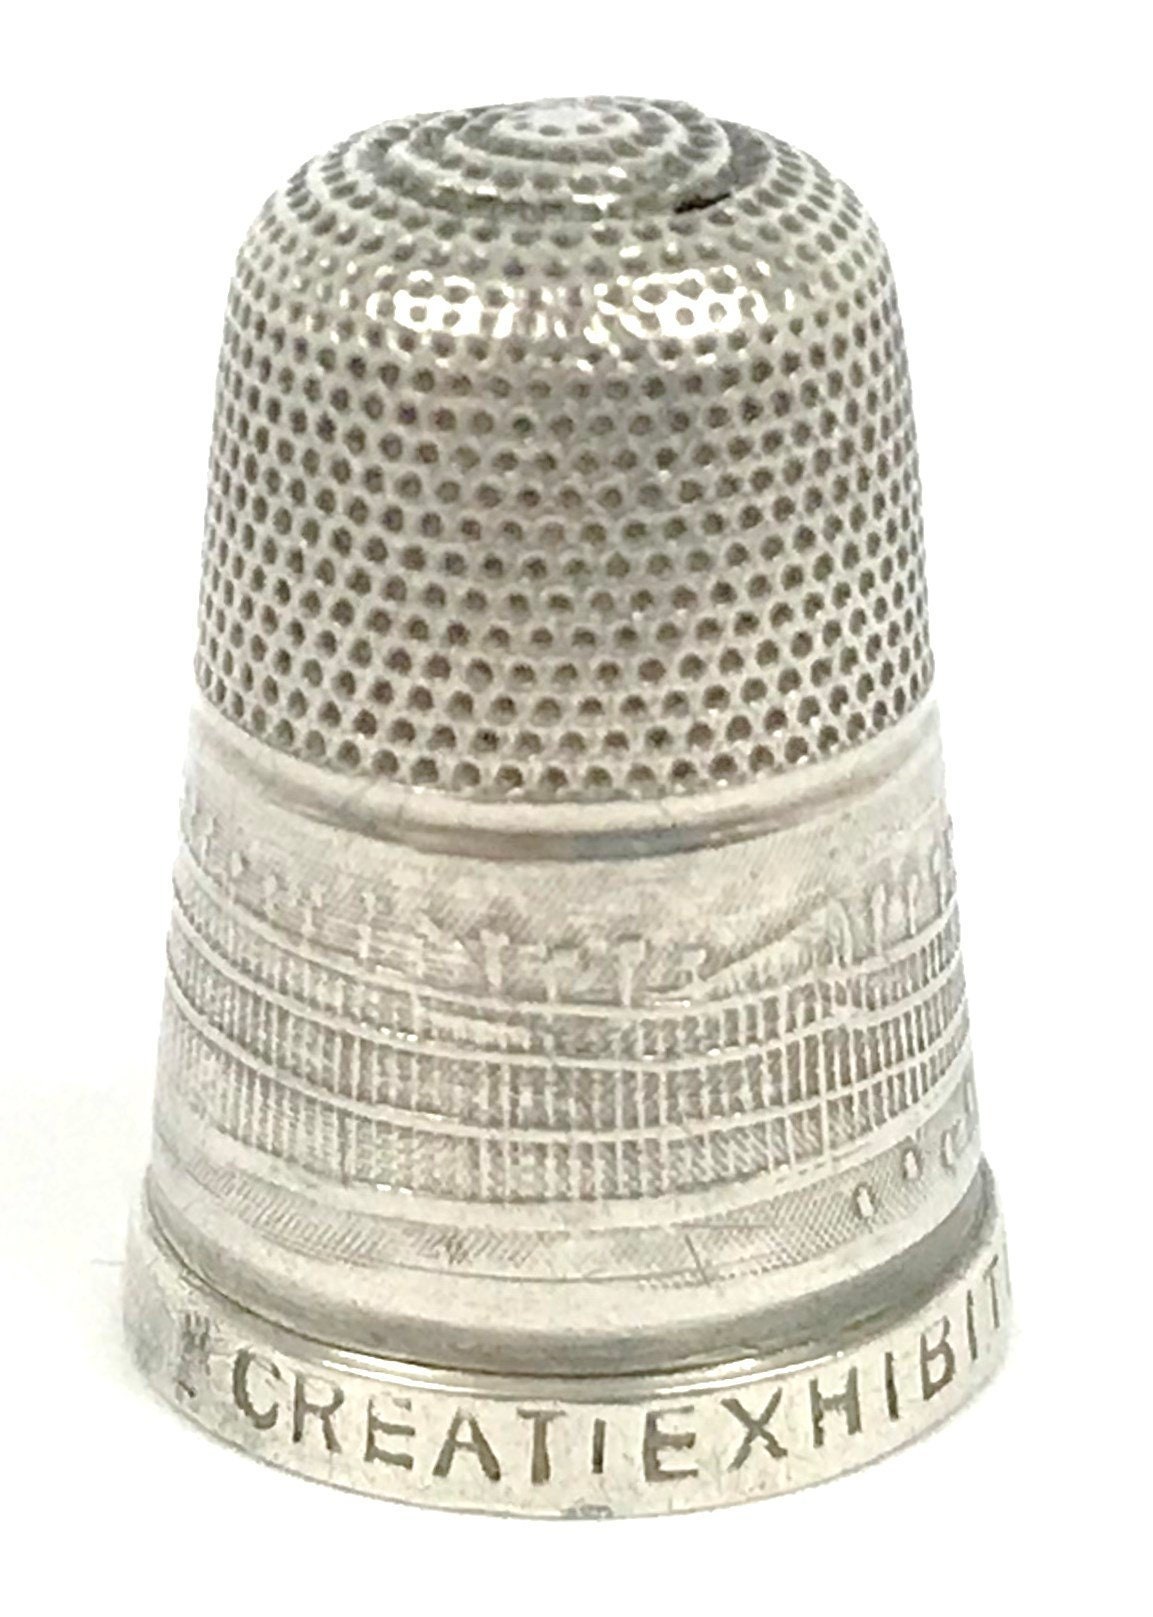 MAGICLULU 60pcs Small Thimble Antique Thimbles Quilting Thimbles Knitting  Thimble Vintage Sewing Thimbles for Fingers Embroidery Thimble Pin Needle